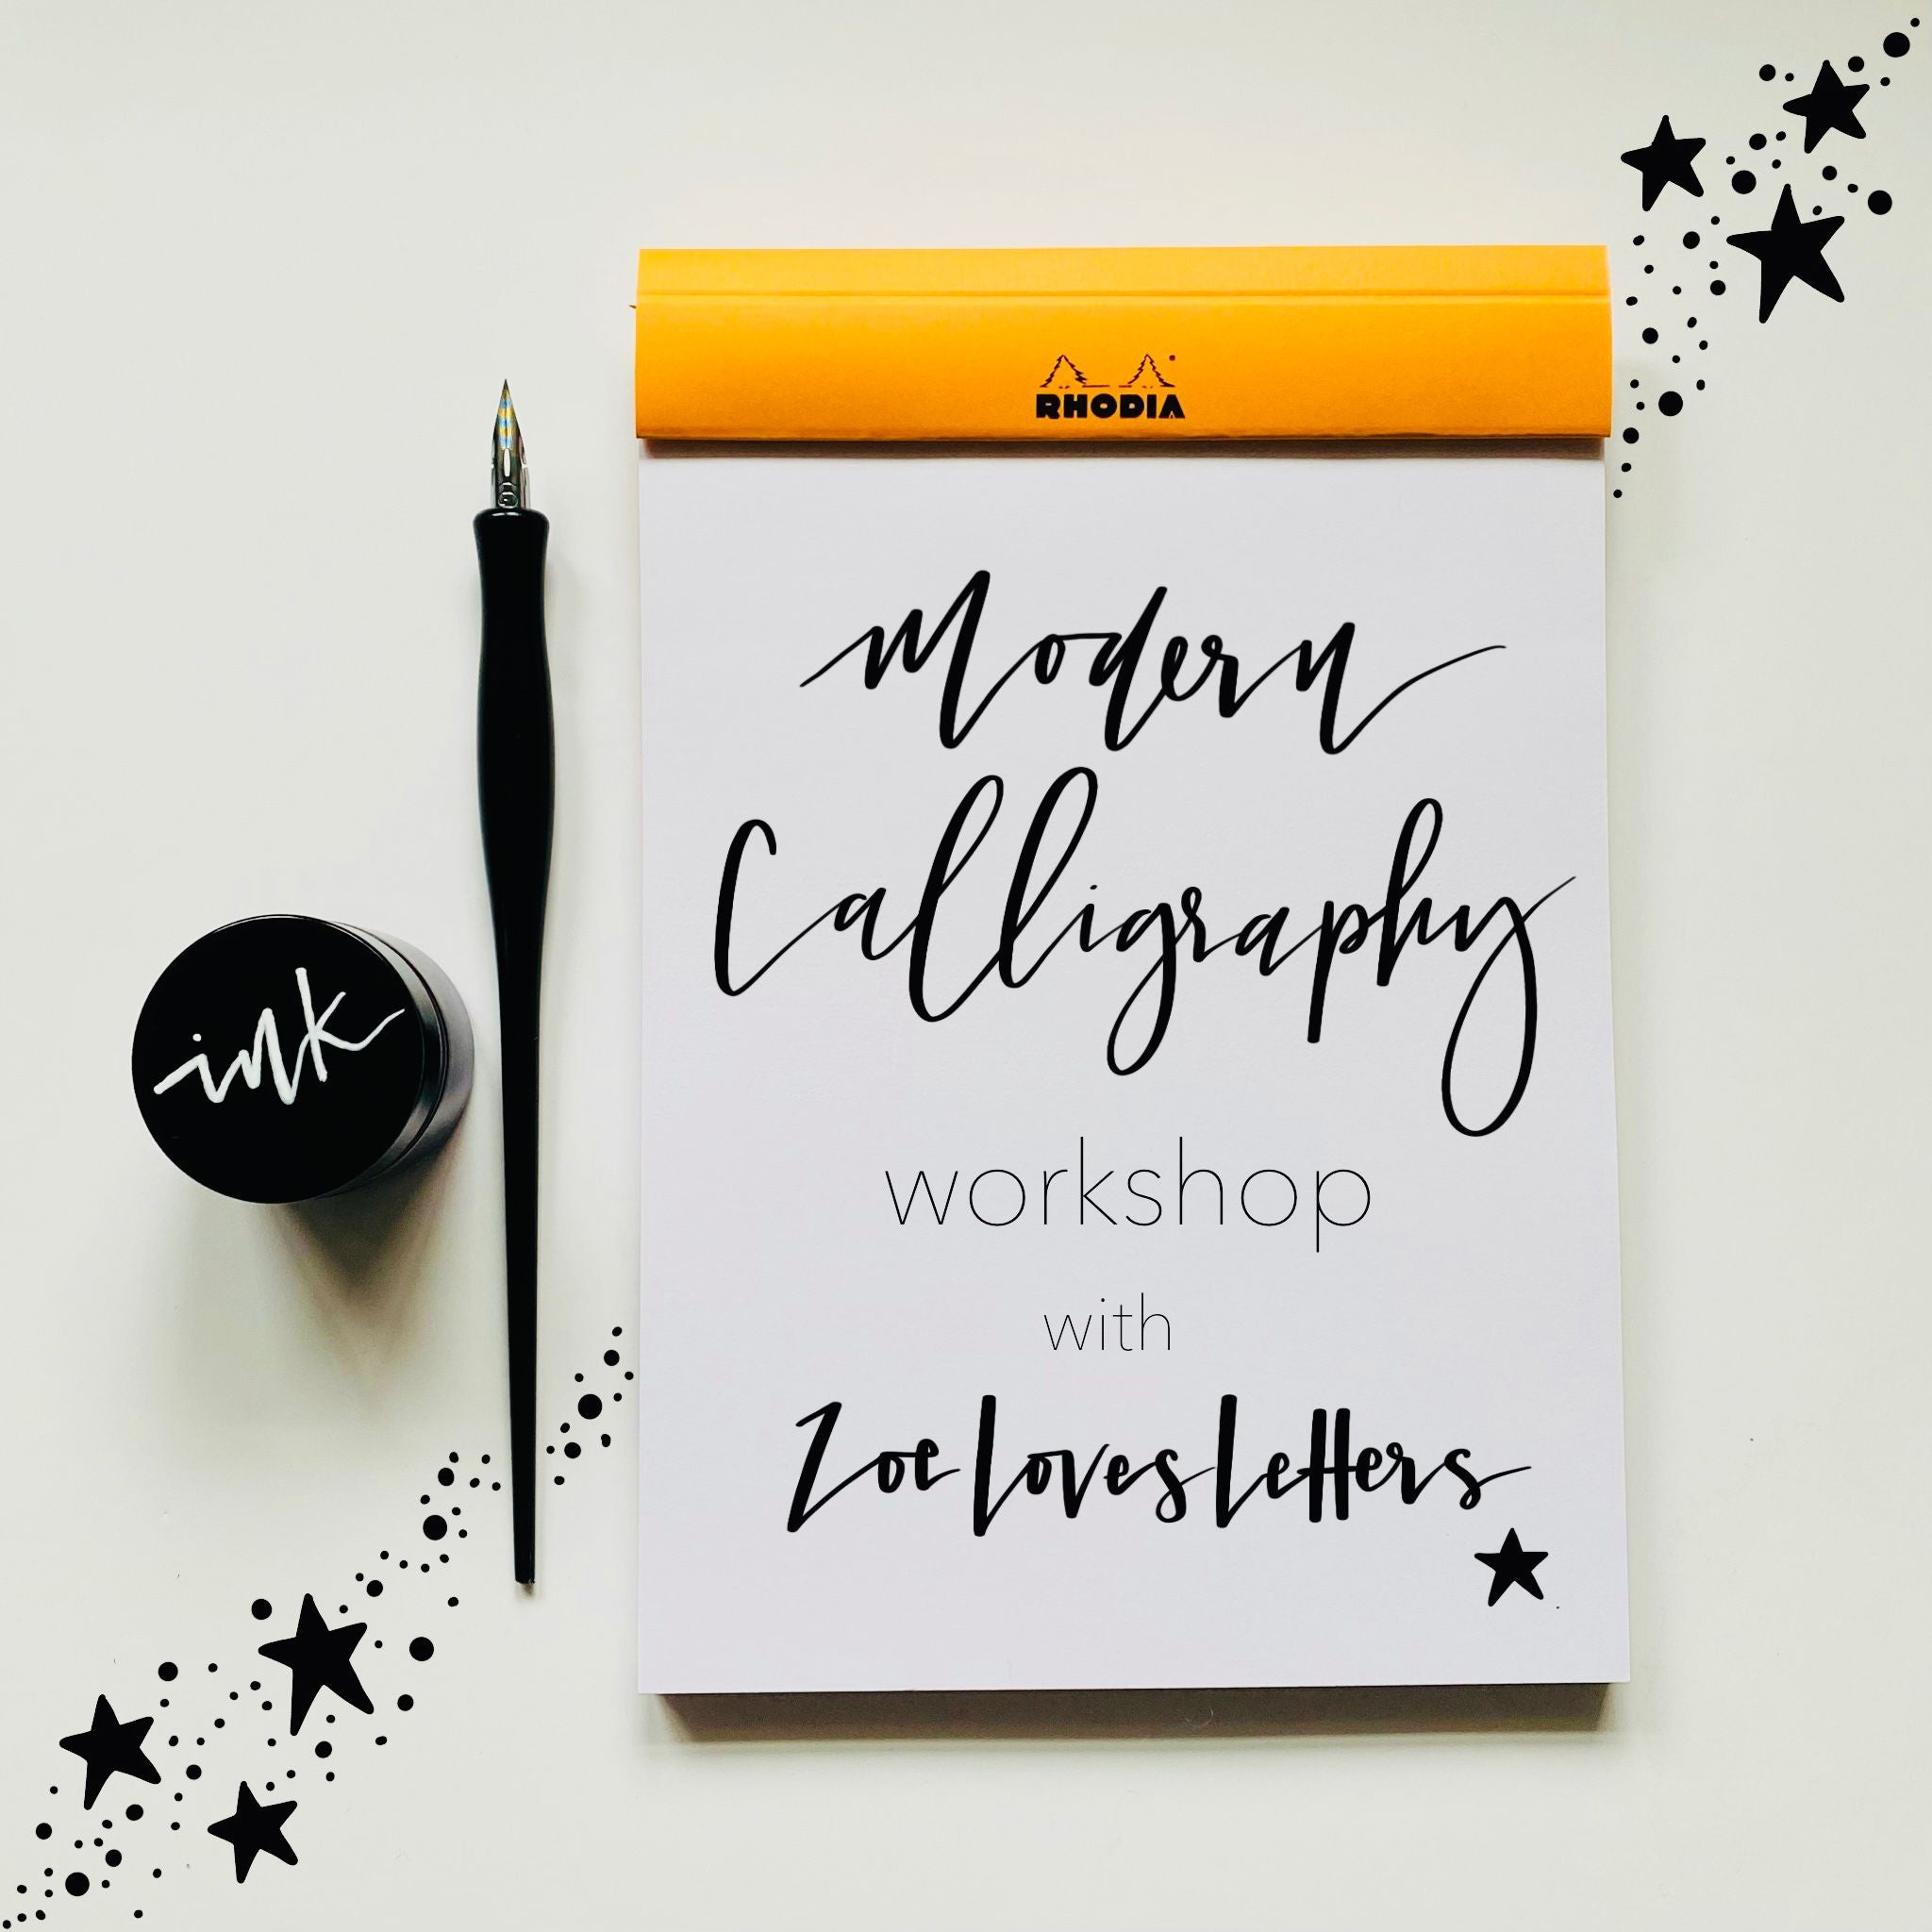 Modern Calligraphy for Beginners at Aloft Greenville Downtown